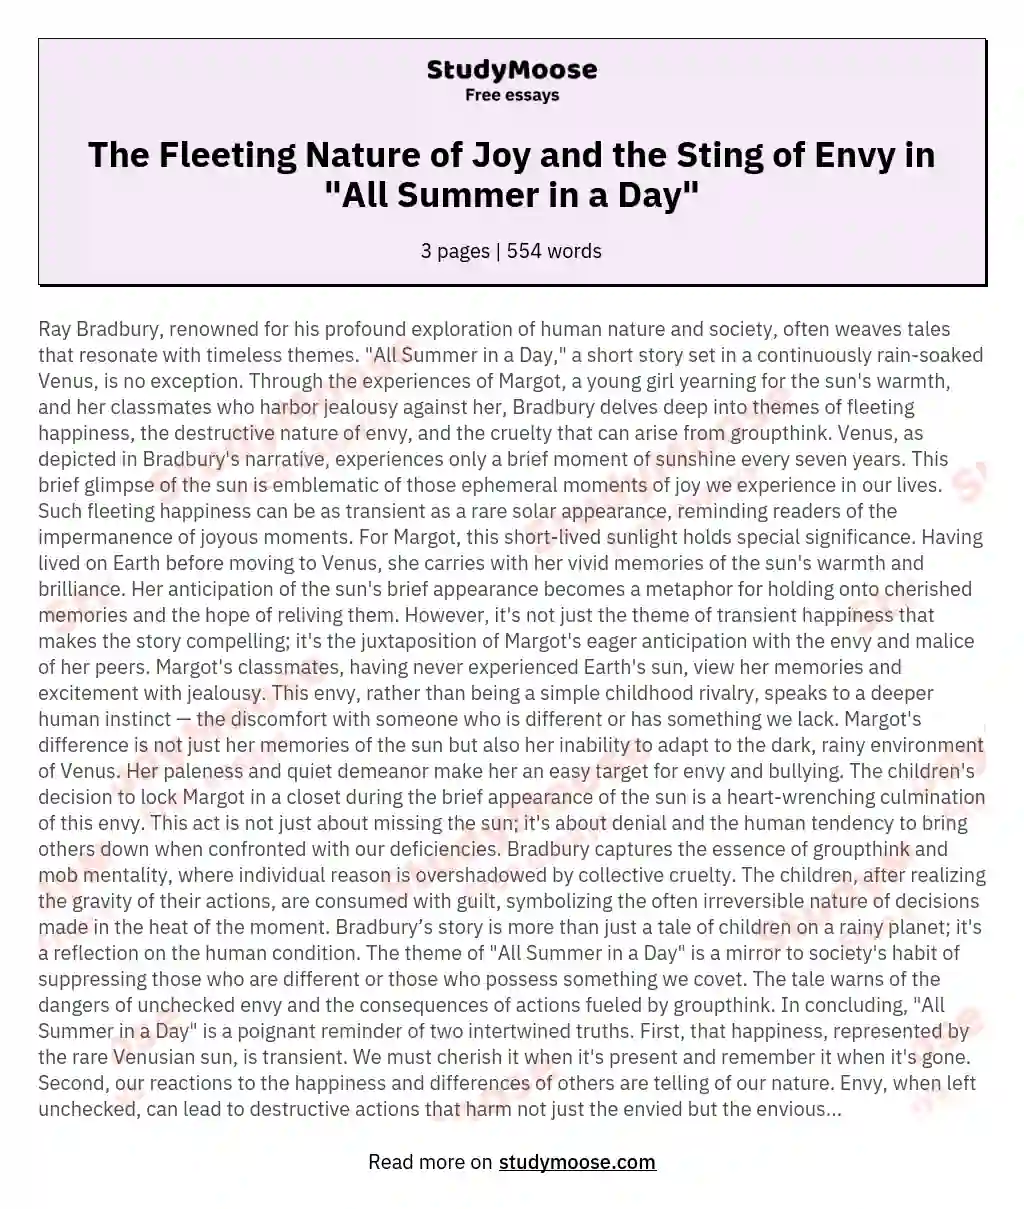 The Fleeting Nature of Joy and the Sting of Envy in "All Summer in a Day" essay